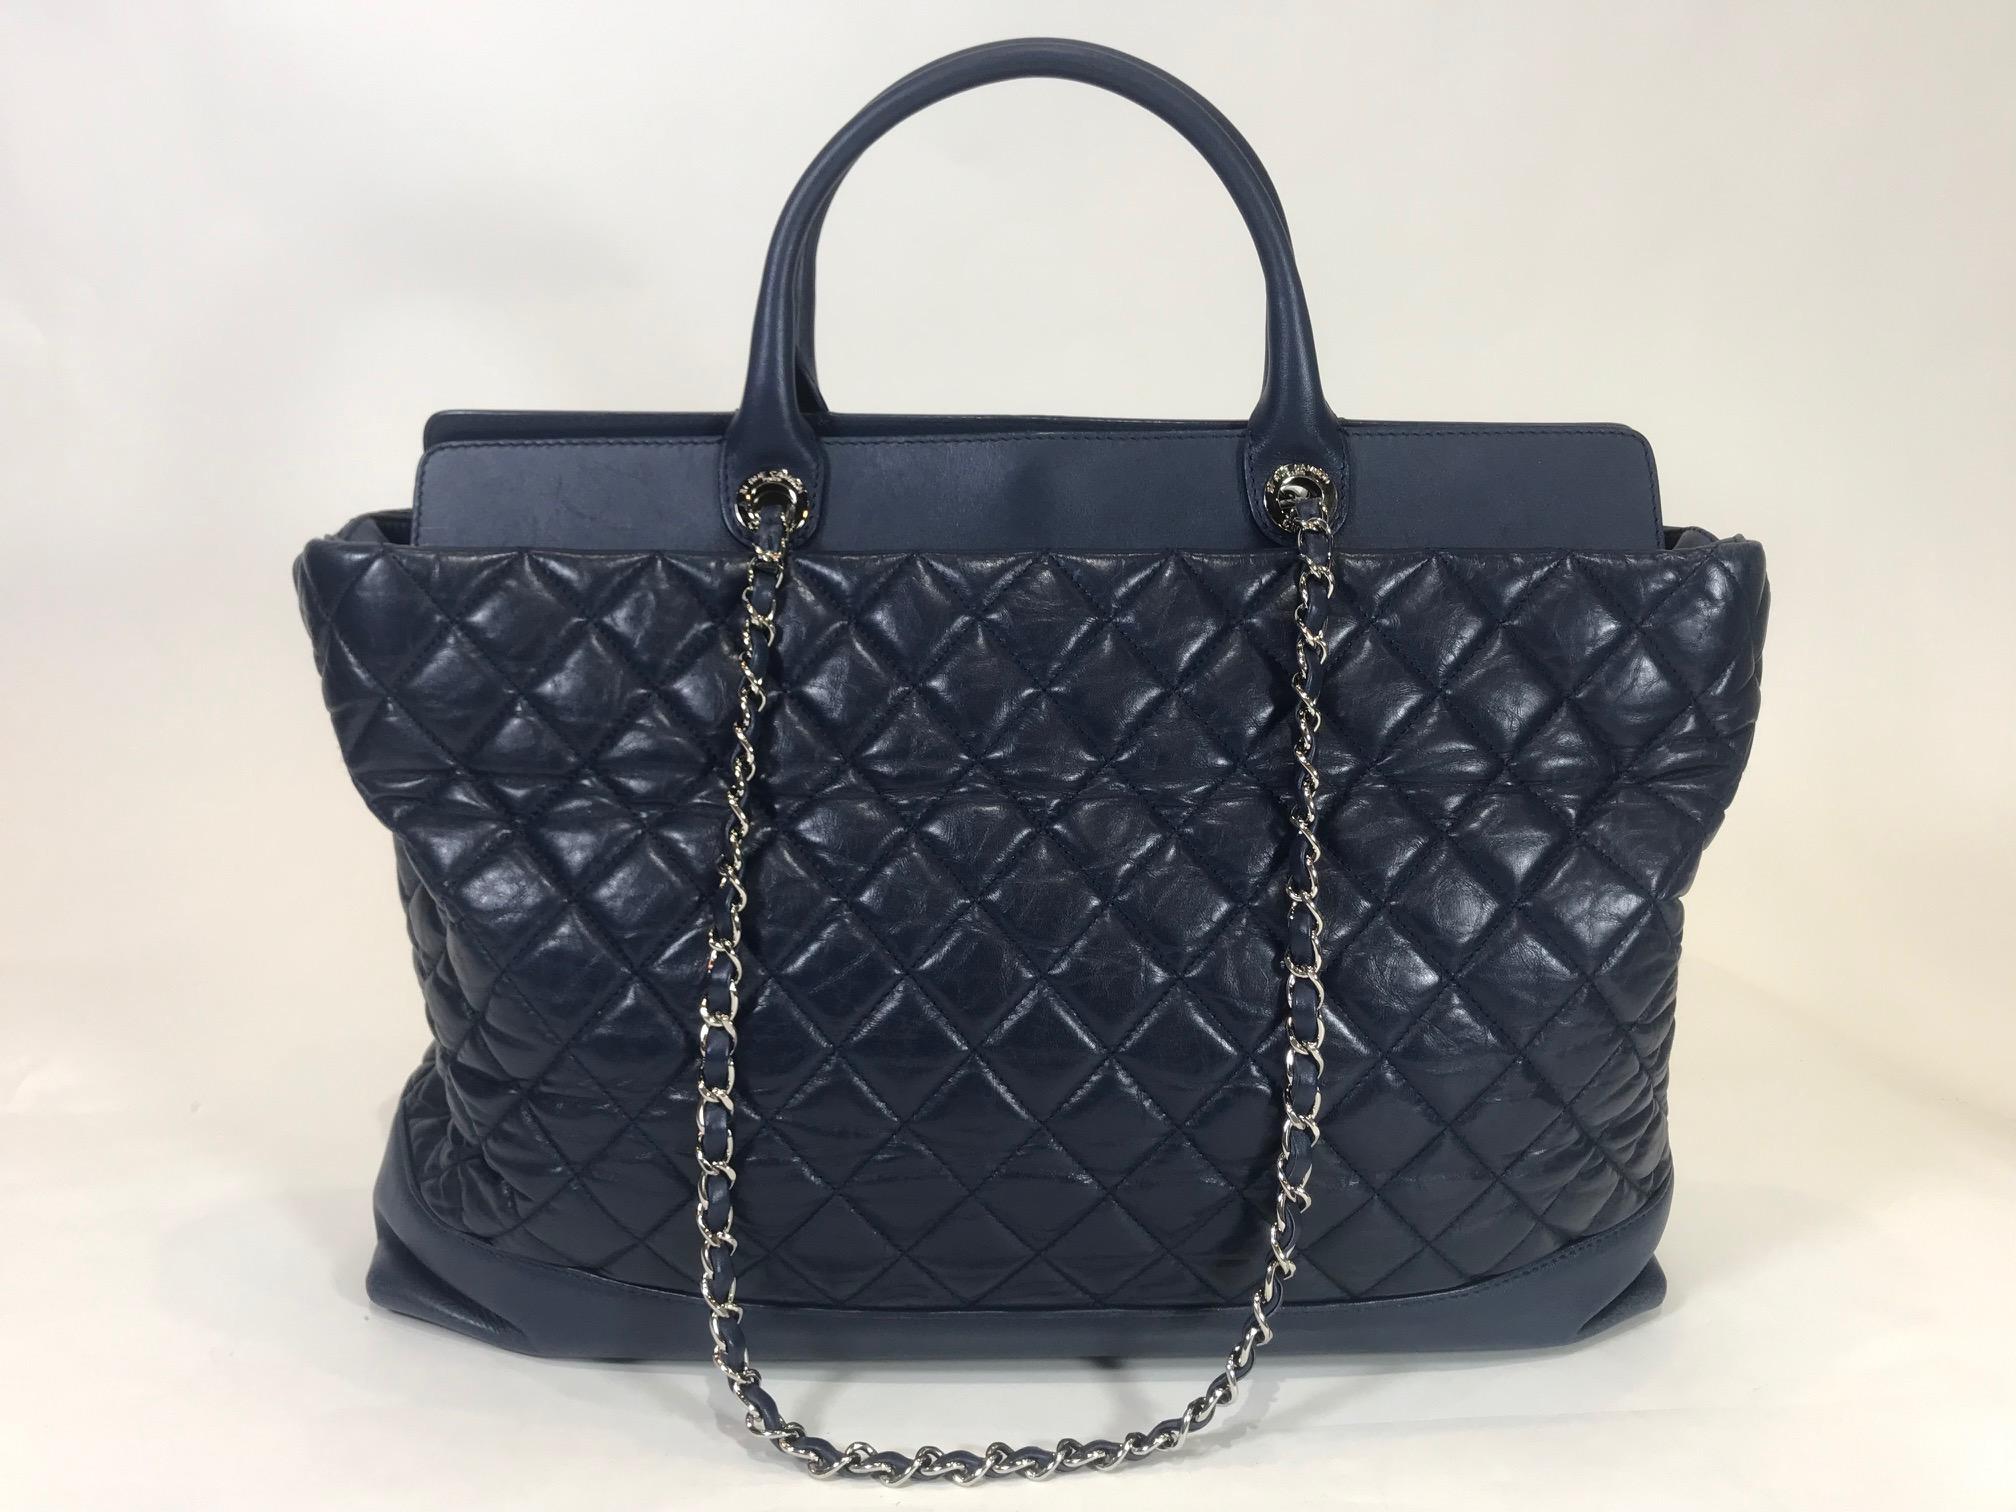 Black Chanel Be CC Tote For Sale